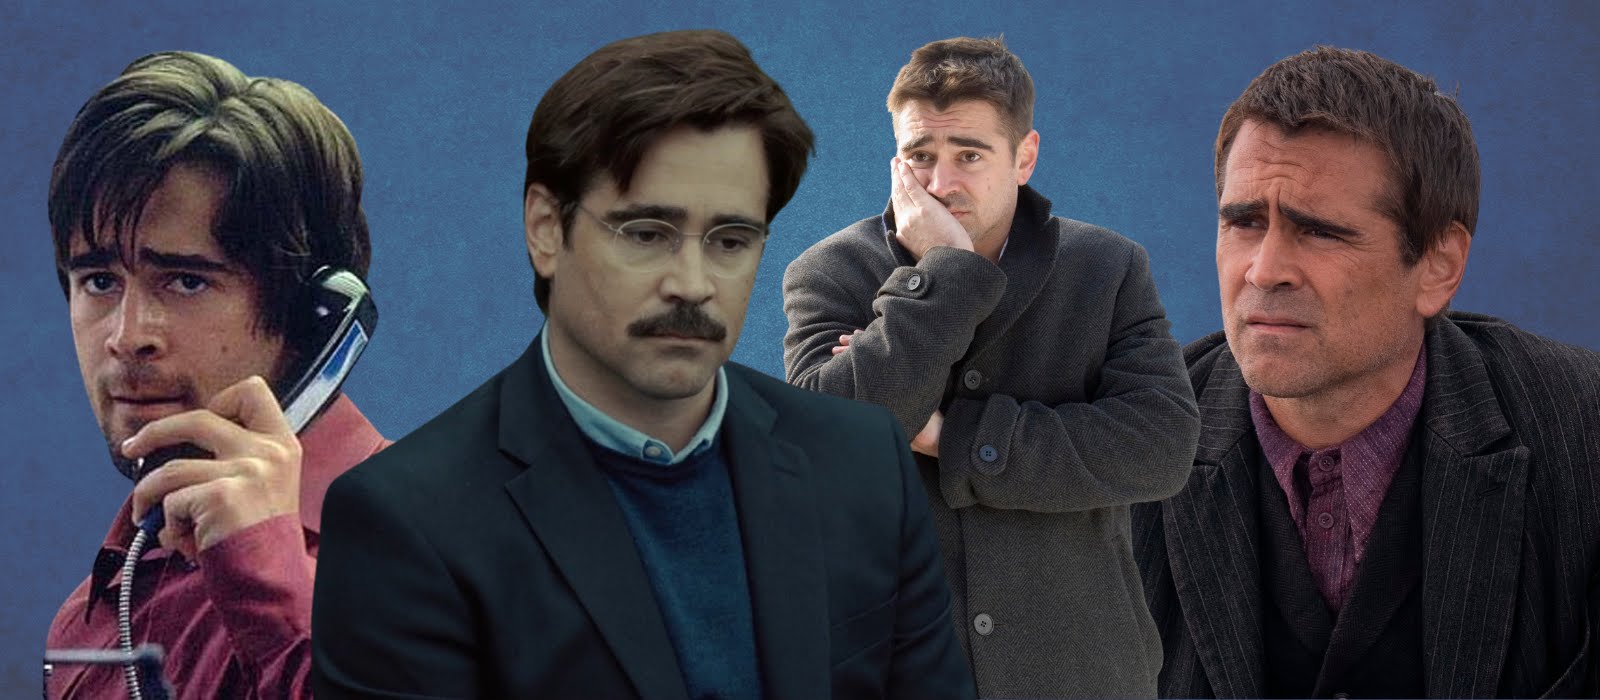 Colin Farrell is getting a star on the Hollywood Walk of Fame